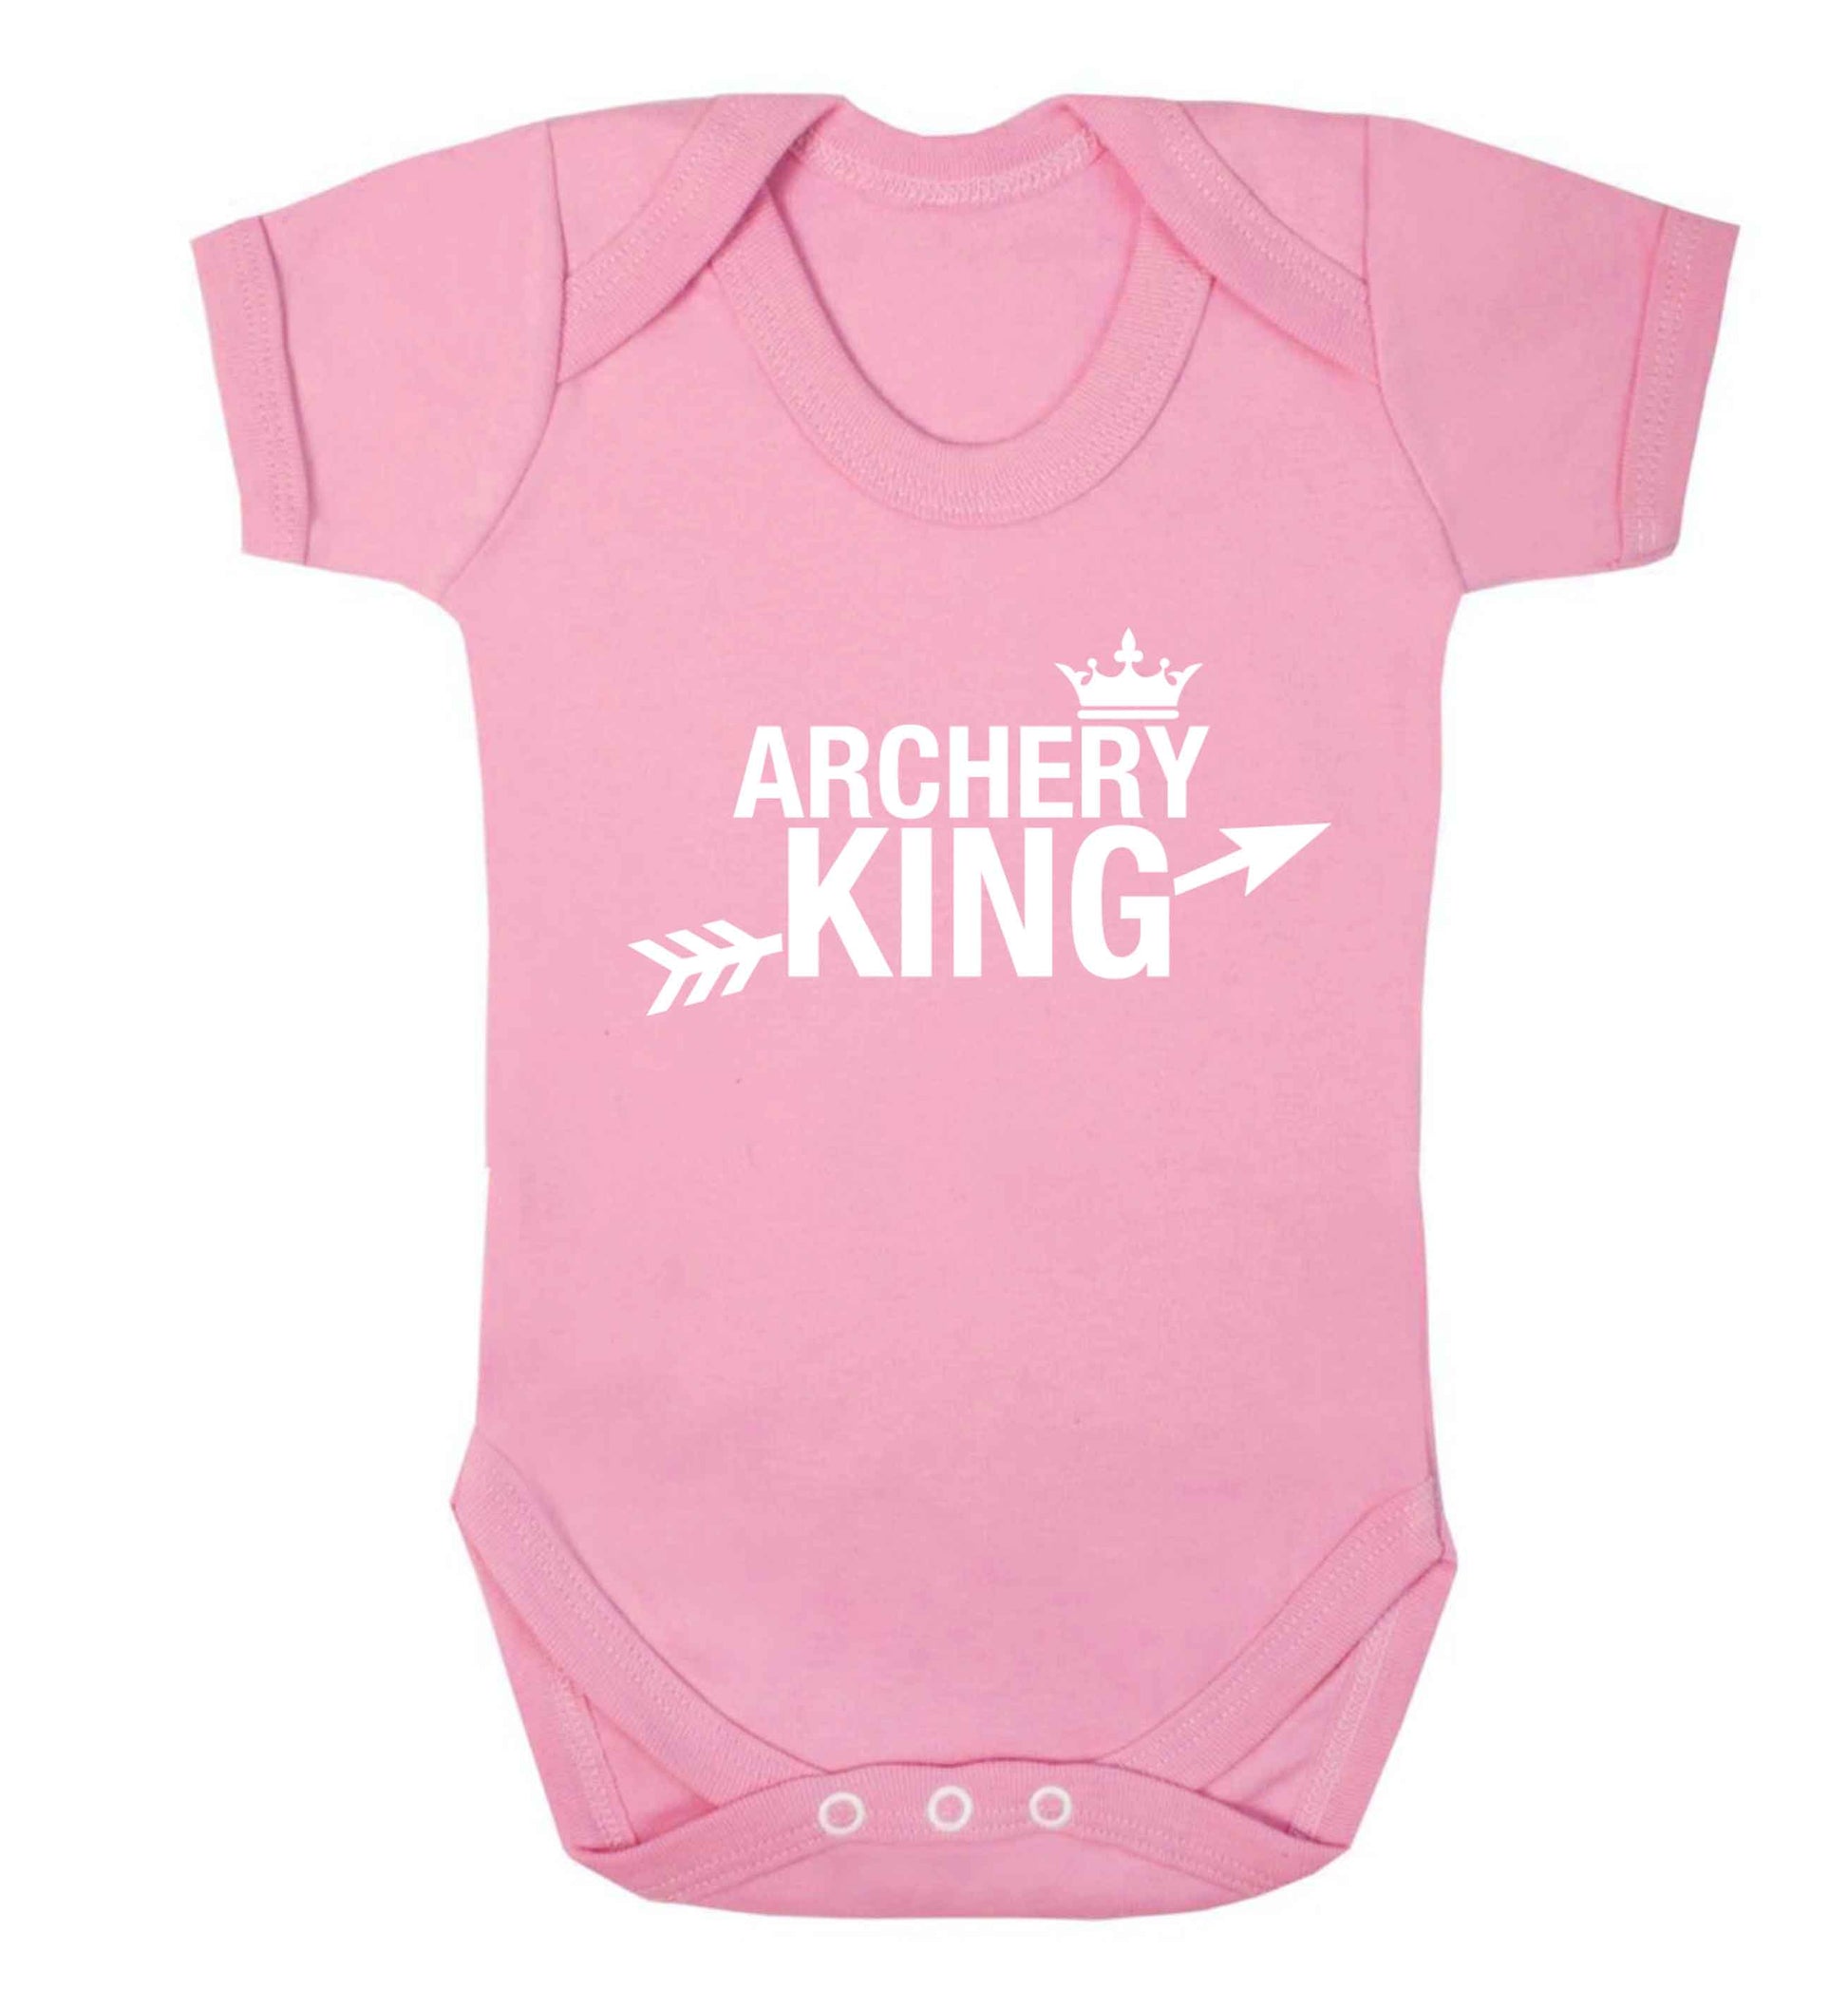 Archery king Baby Vest pale pink 18-24 months